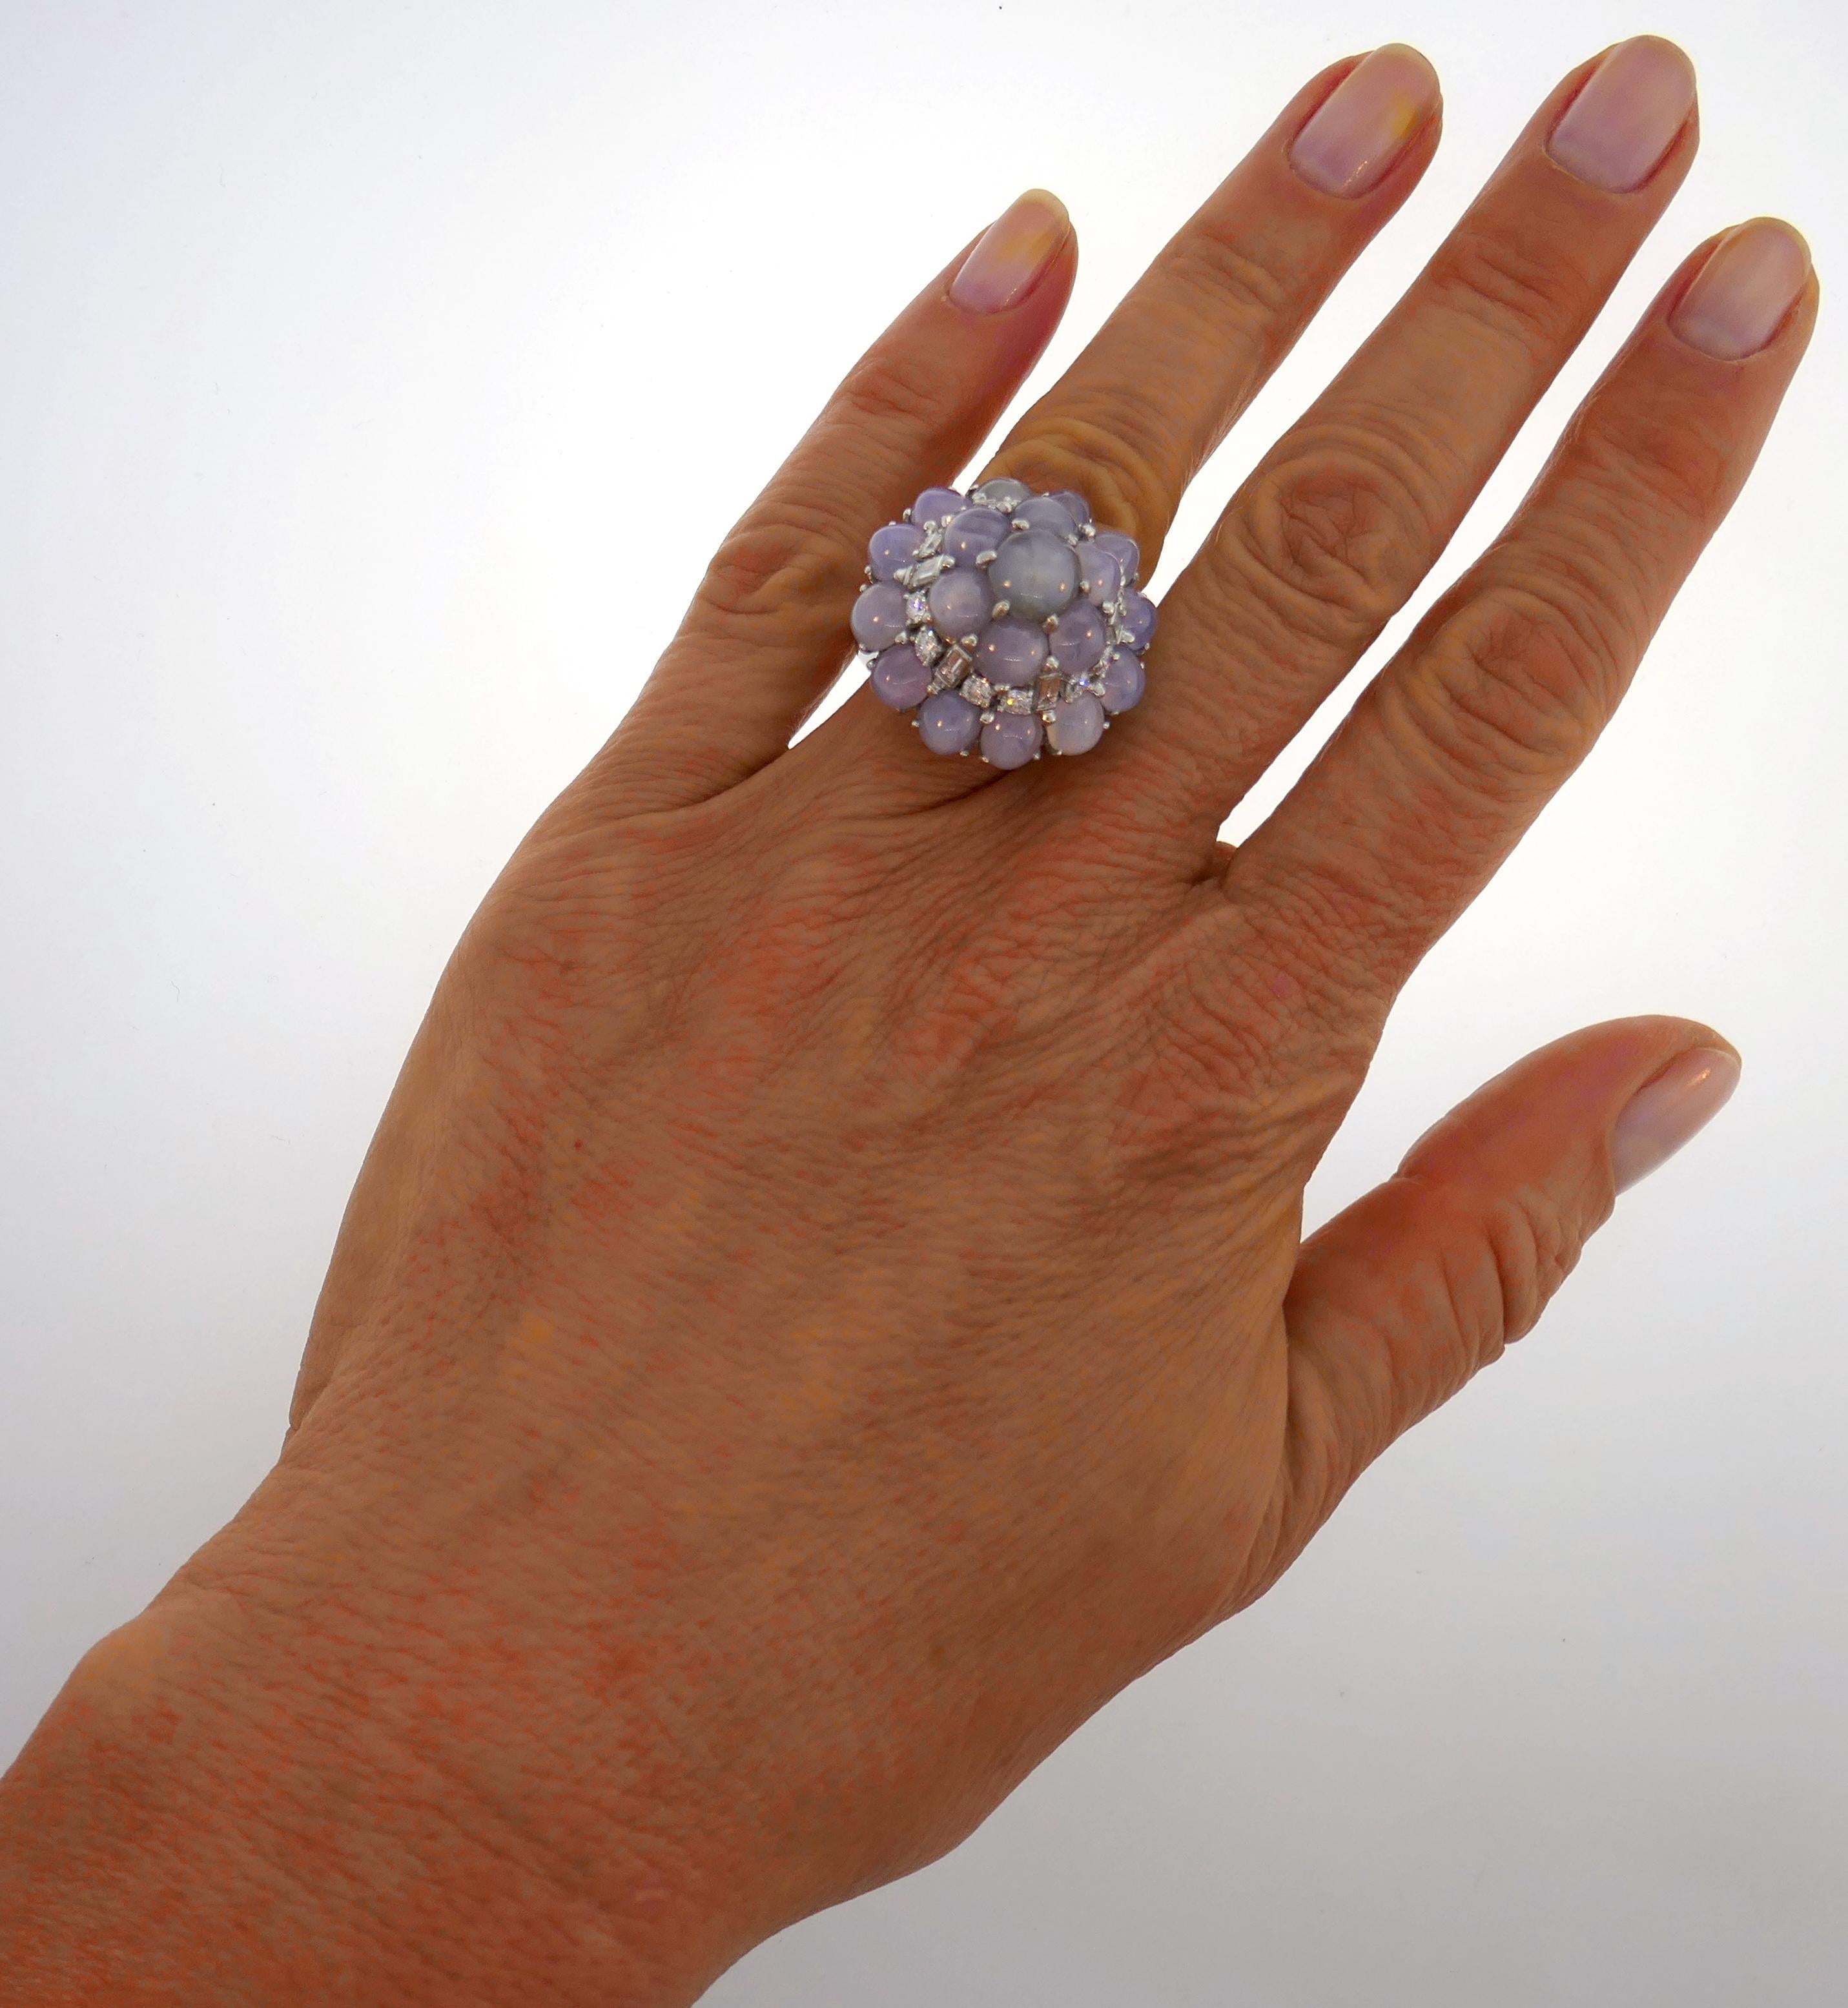 Classy and timeless cocktail ring created by Oscar Heyman in the 1960s. Elegant and wearable, the ring is a great addition to your jewelry collection. 
The ring is made of platinum and features nineteen cabochon star sapphires (total weight 25.45